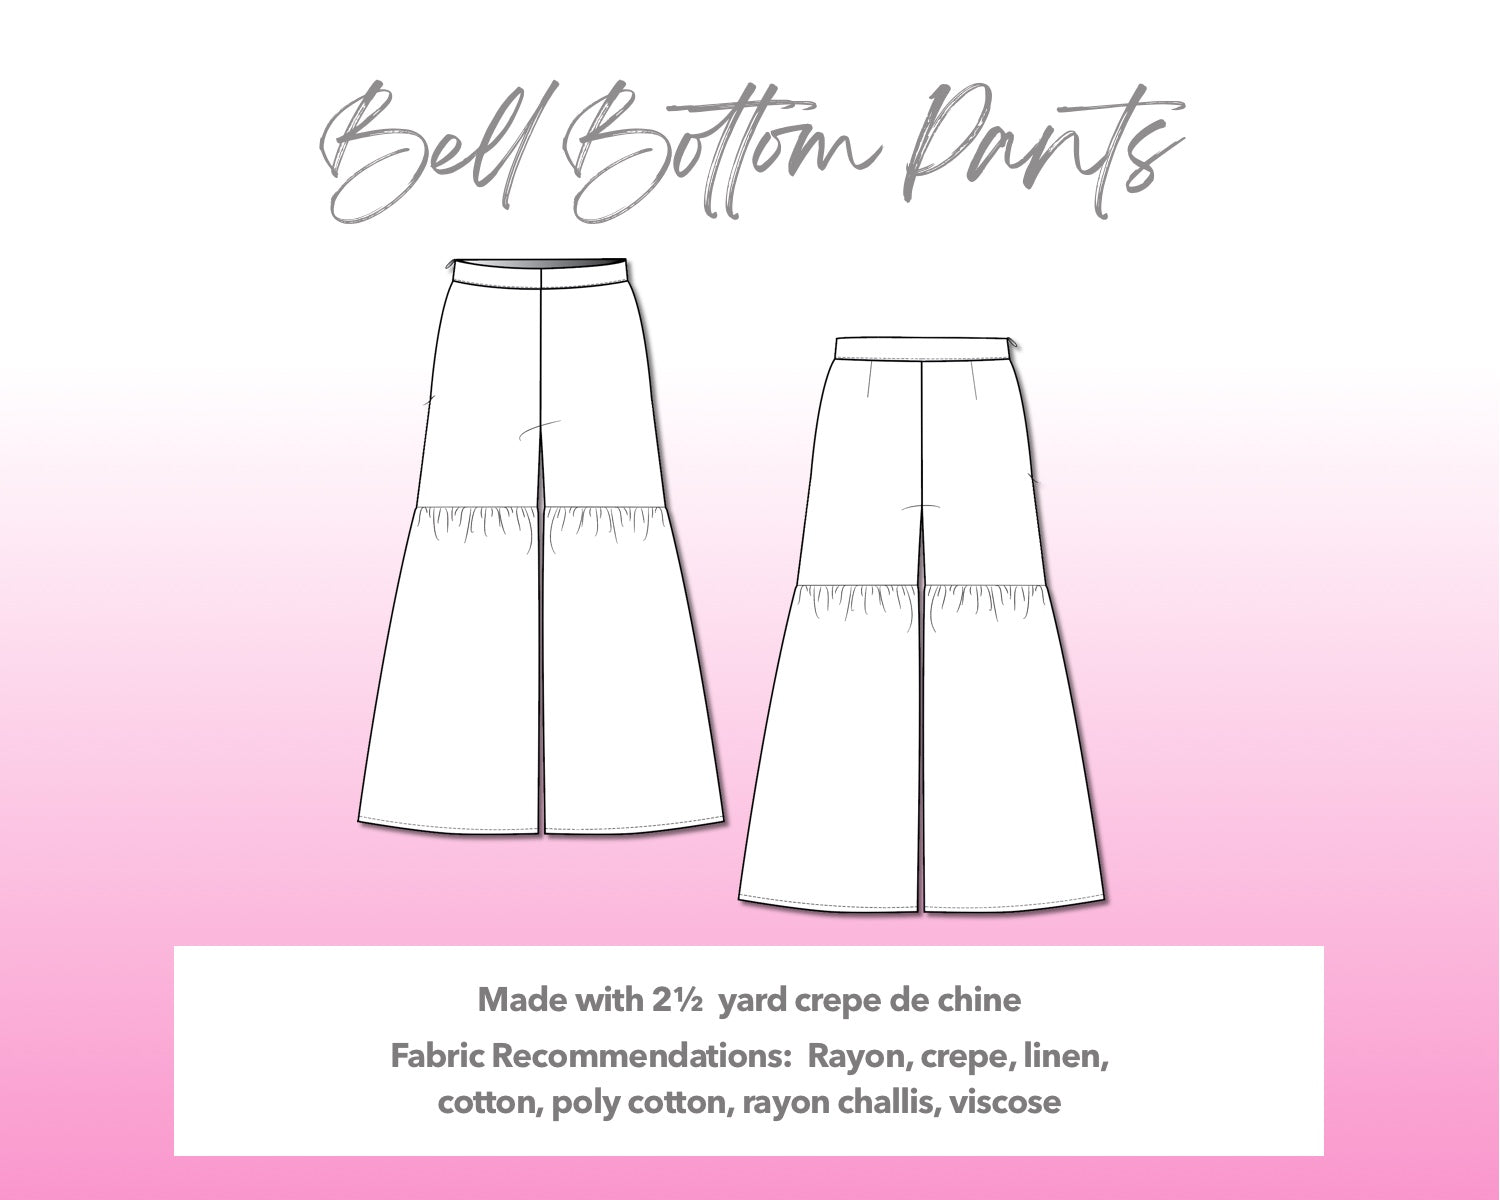 Illustration and detailed description for Bell Bottom Pants sewing pattern.